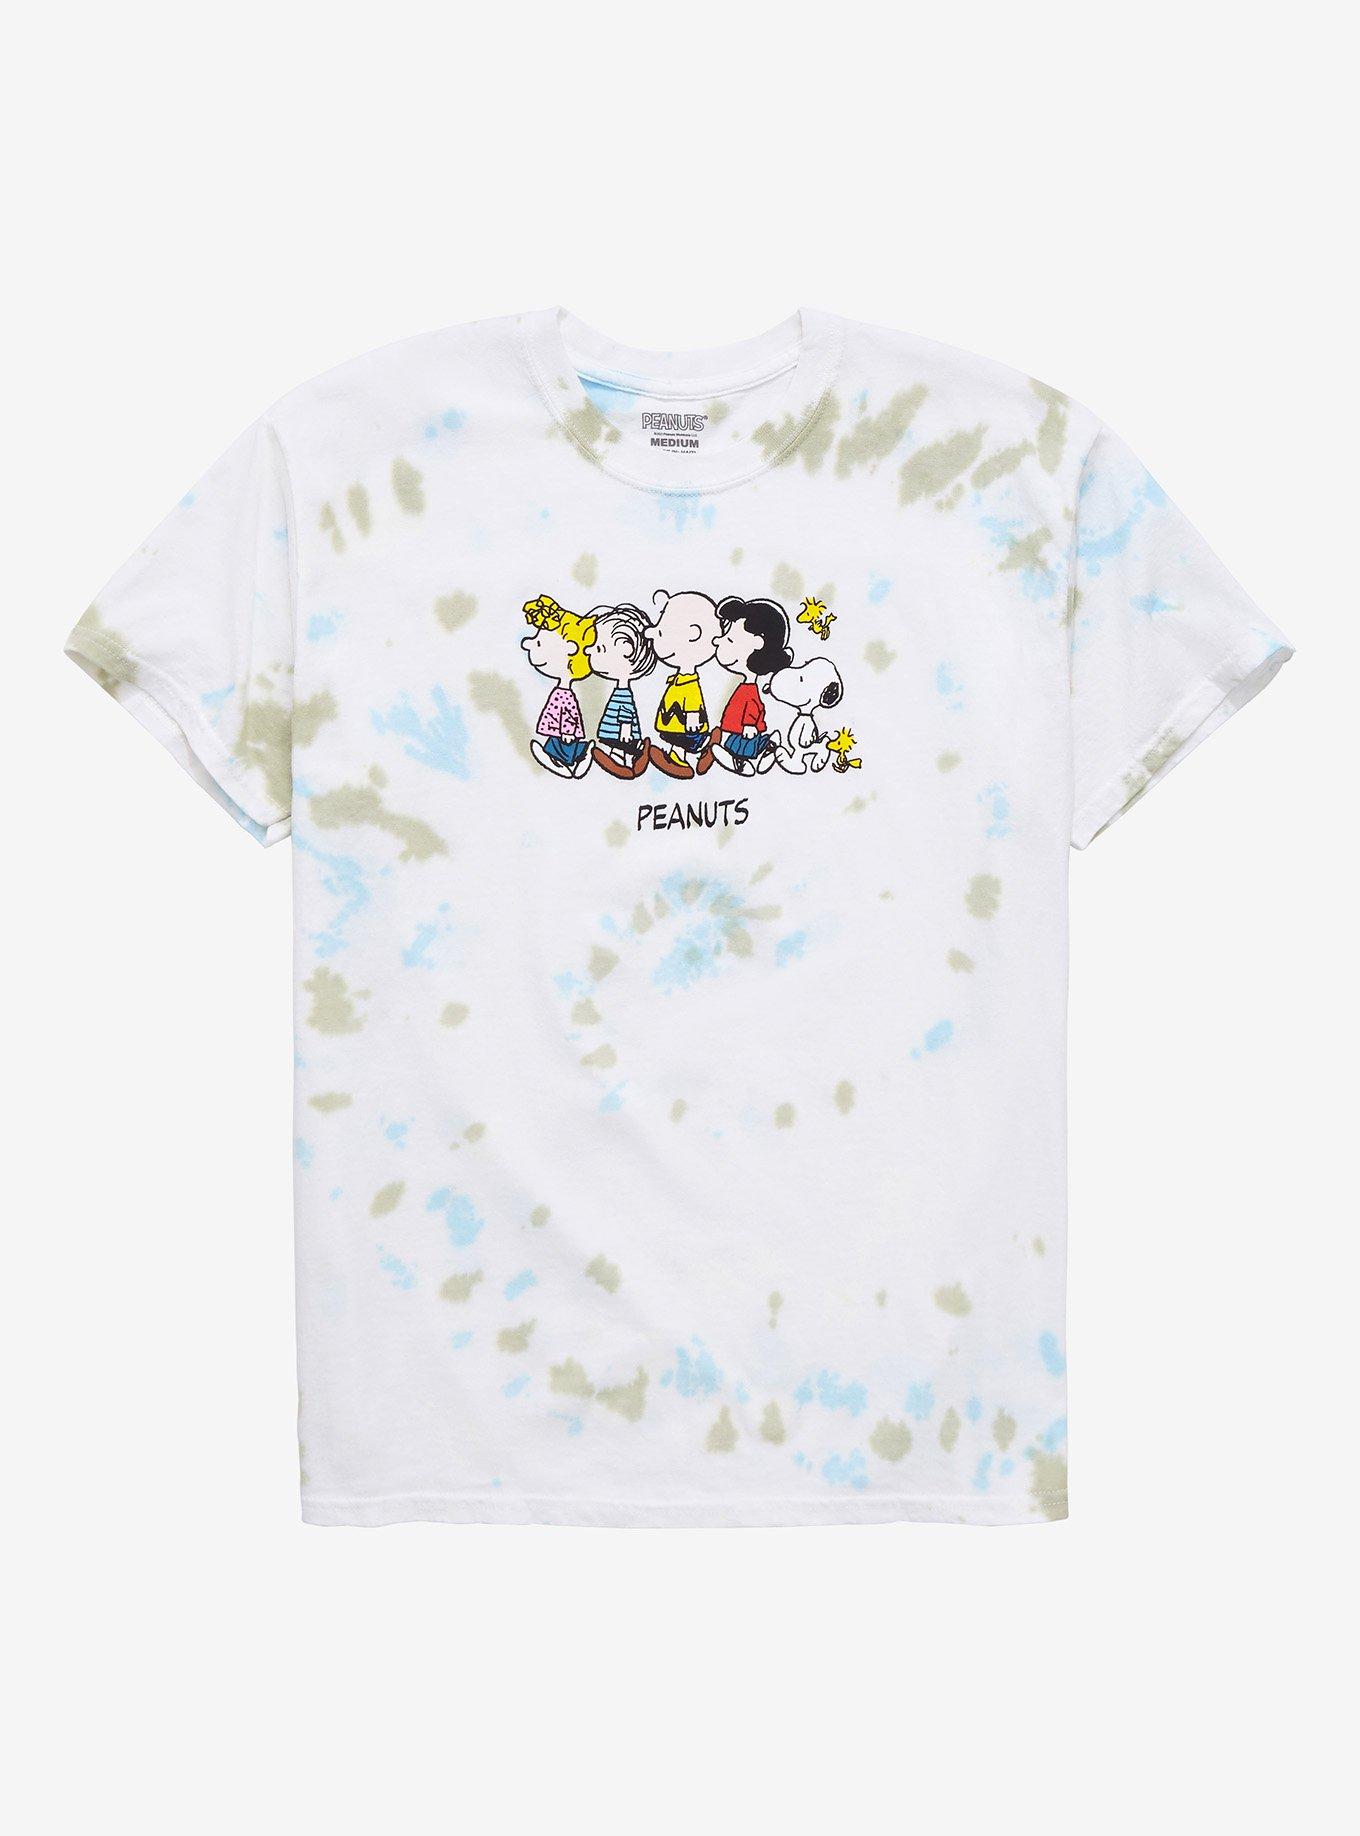 Peanuts Friends Line Up Tie-Dye T-Shirt - BoxLunch Exclusive | BoxLunch